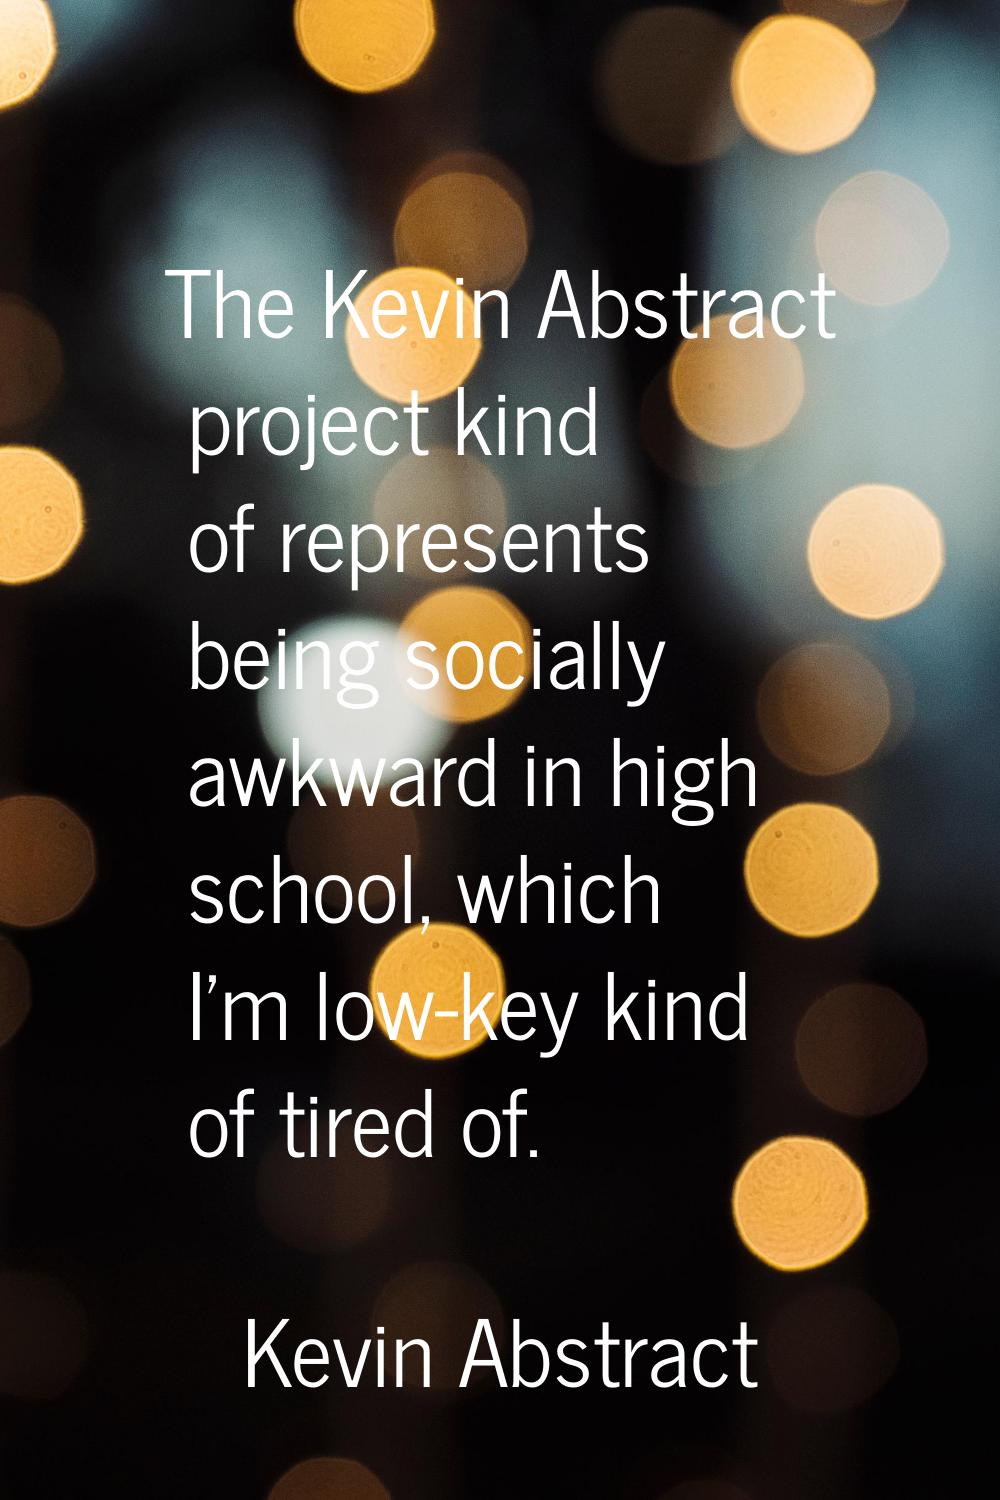 The Kevin Abstract project kind of represents being socially awkward in high school, which I'm low-